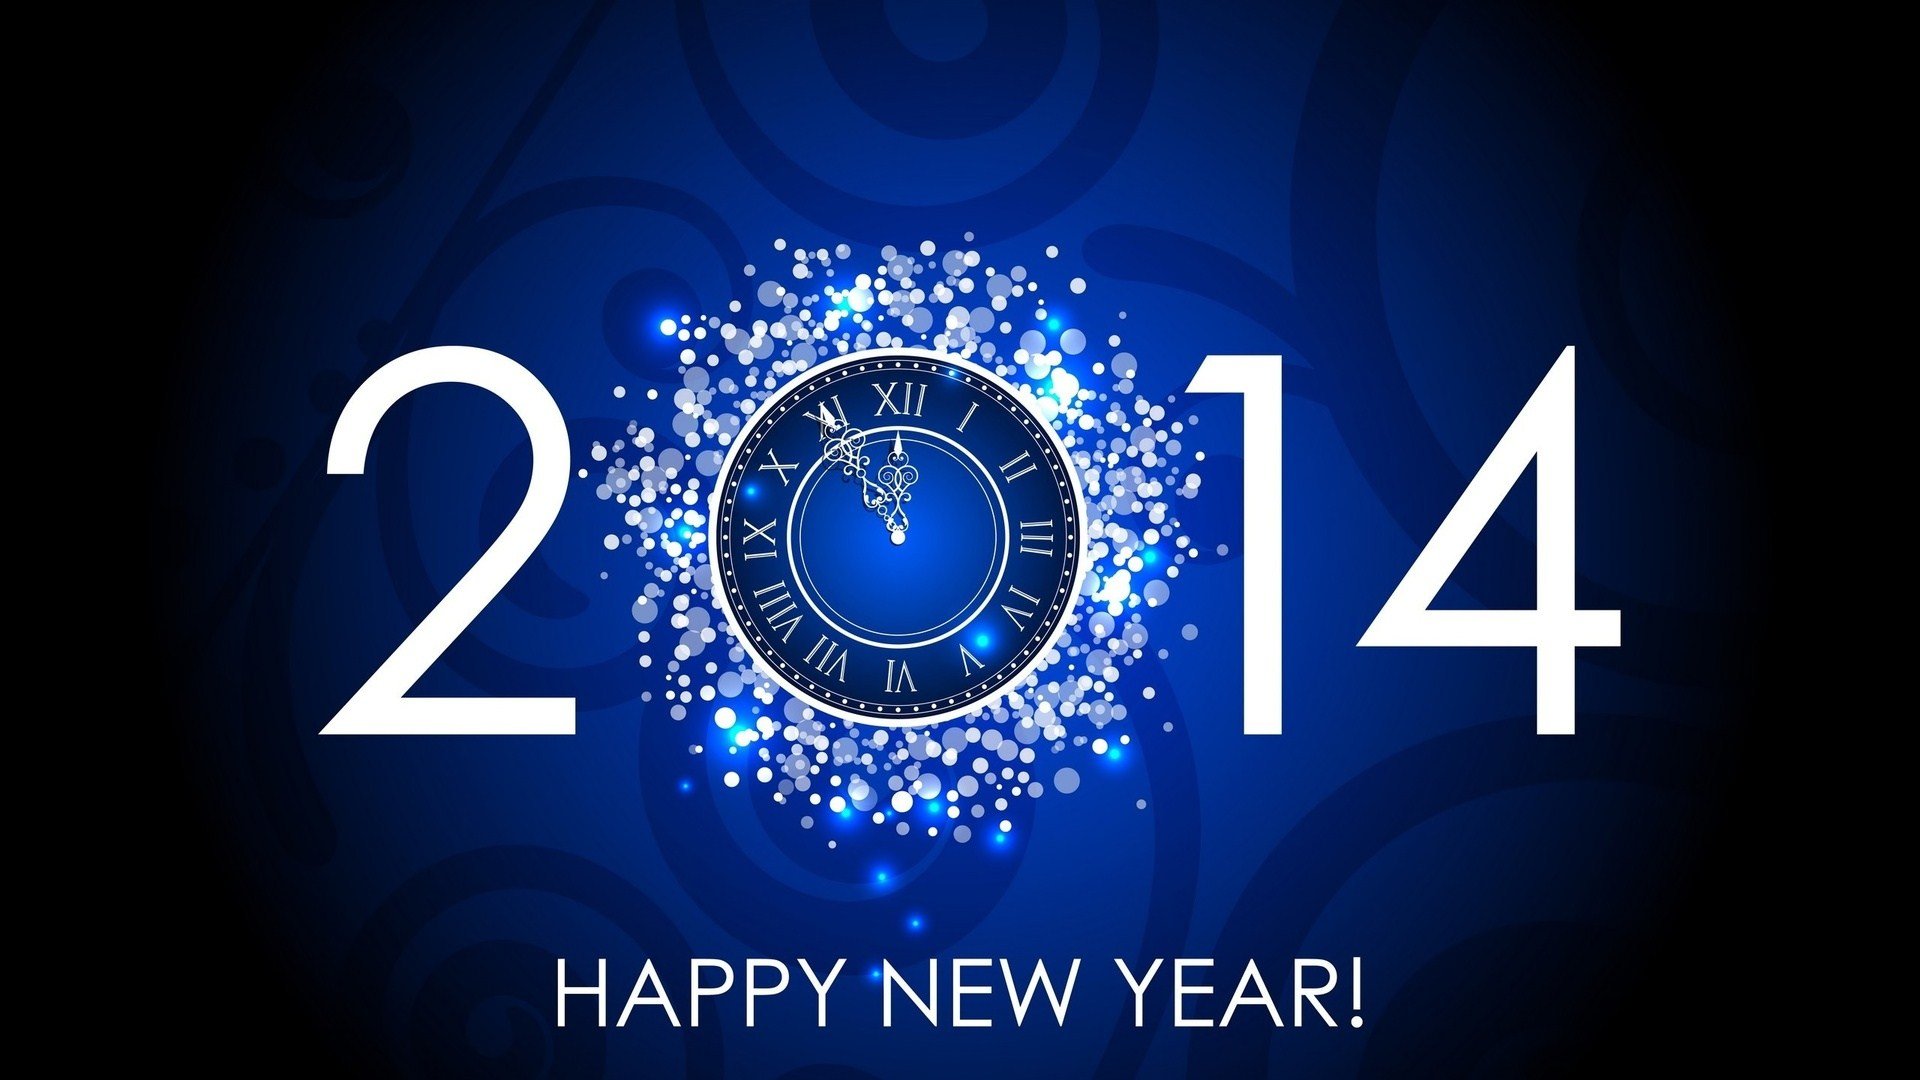 Awesome New Year 2014 free wallpaper ID:41609 for hd 1920x1080 PC